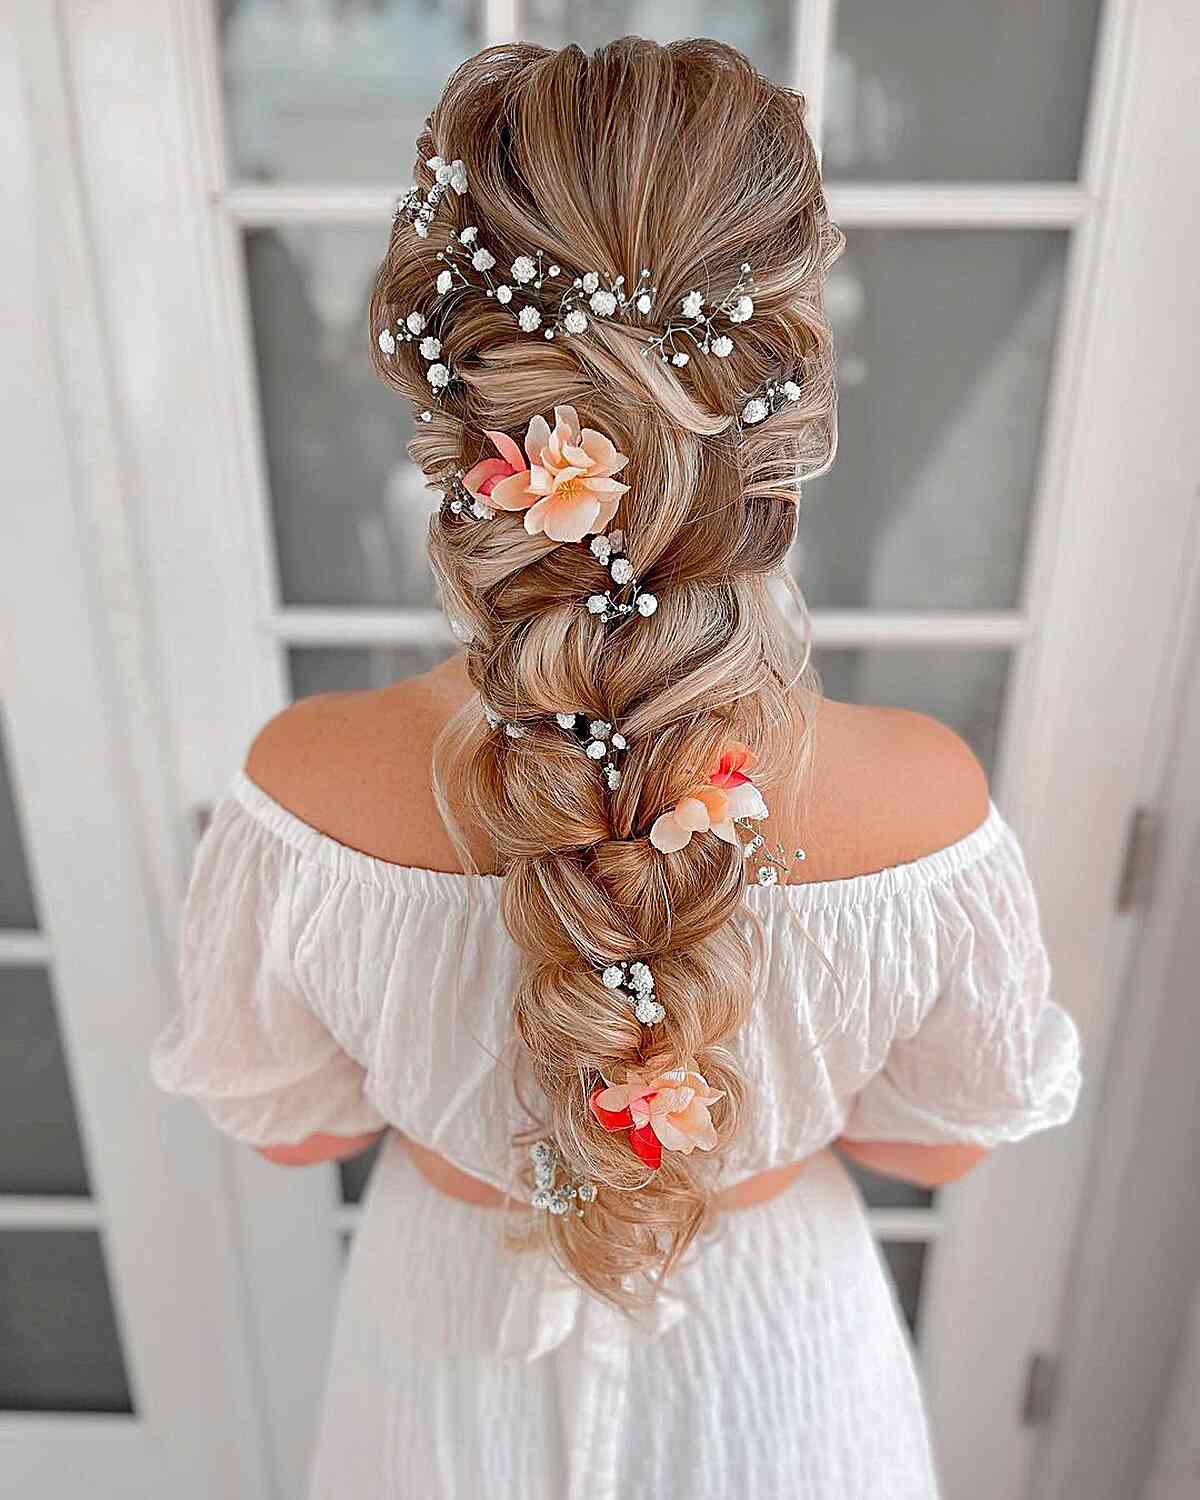 Stunning Braided Long Hair with Flowers for Weddings